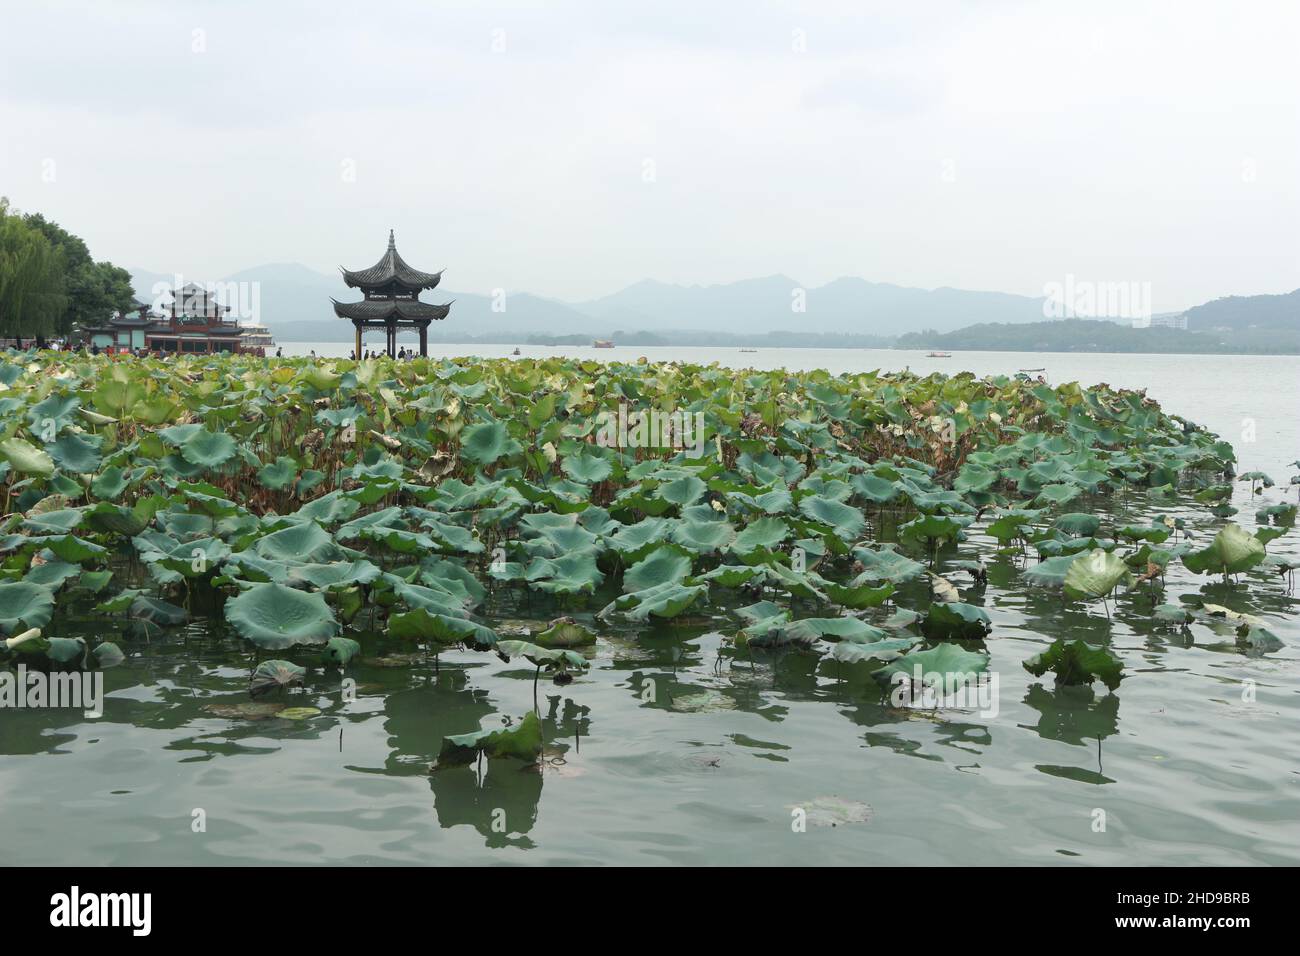 The Xihu lake with lotuses and Chinese style buildings Stock Photo